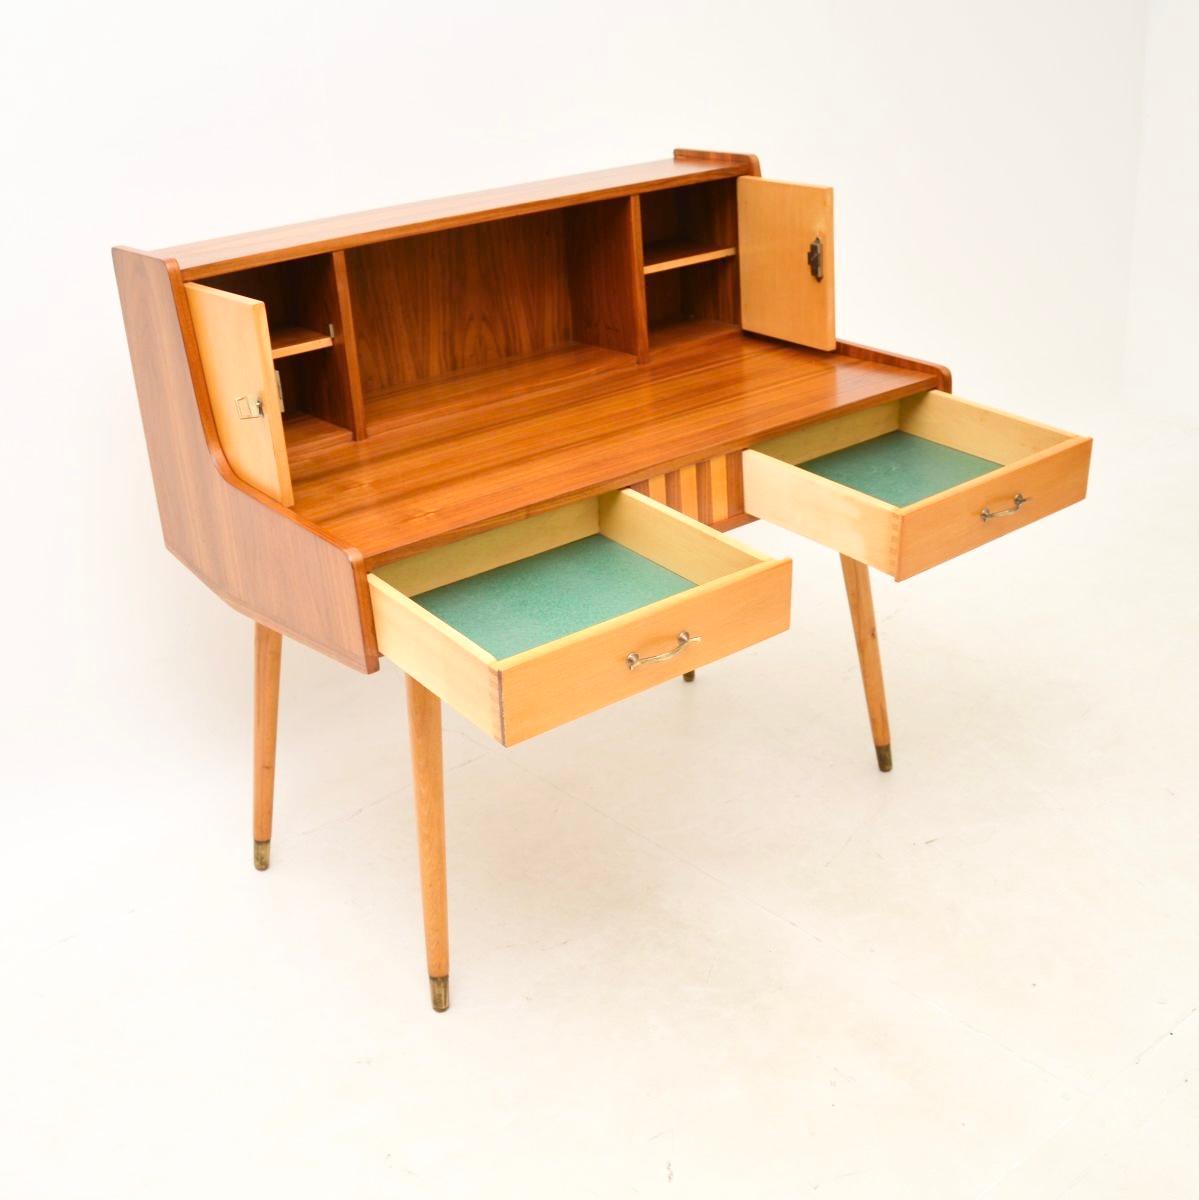 A superb vintage Italian walnut and satin wood desk, dating from the 1950-60’s.

It is beautifully designed and is of superb quality, standing on wonderful tapered legs with brass feet caps. There is lots of storage space in the lower drawers and